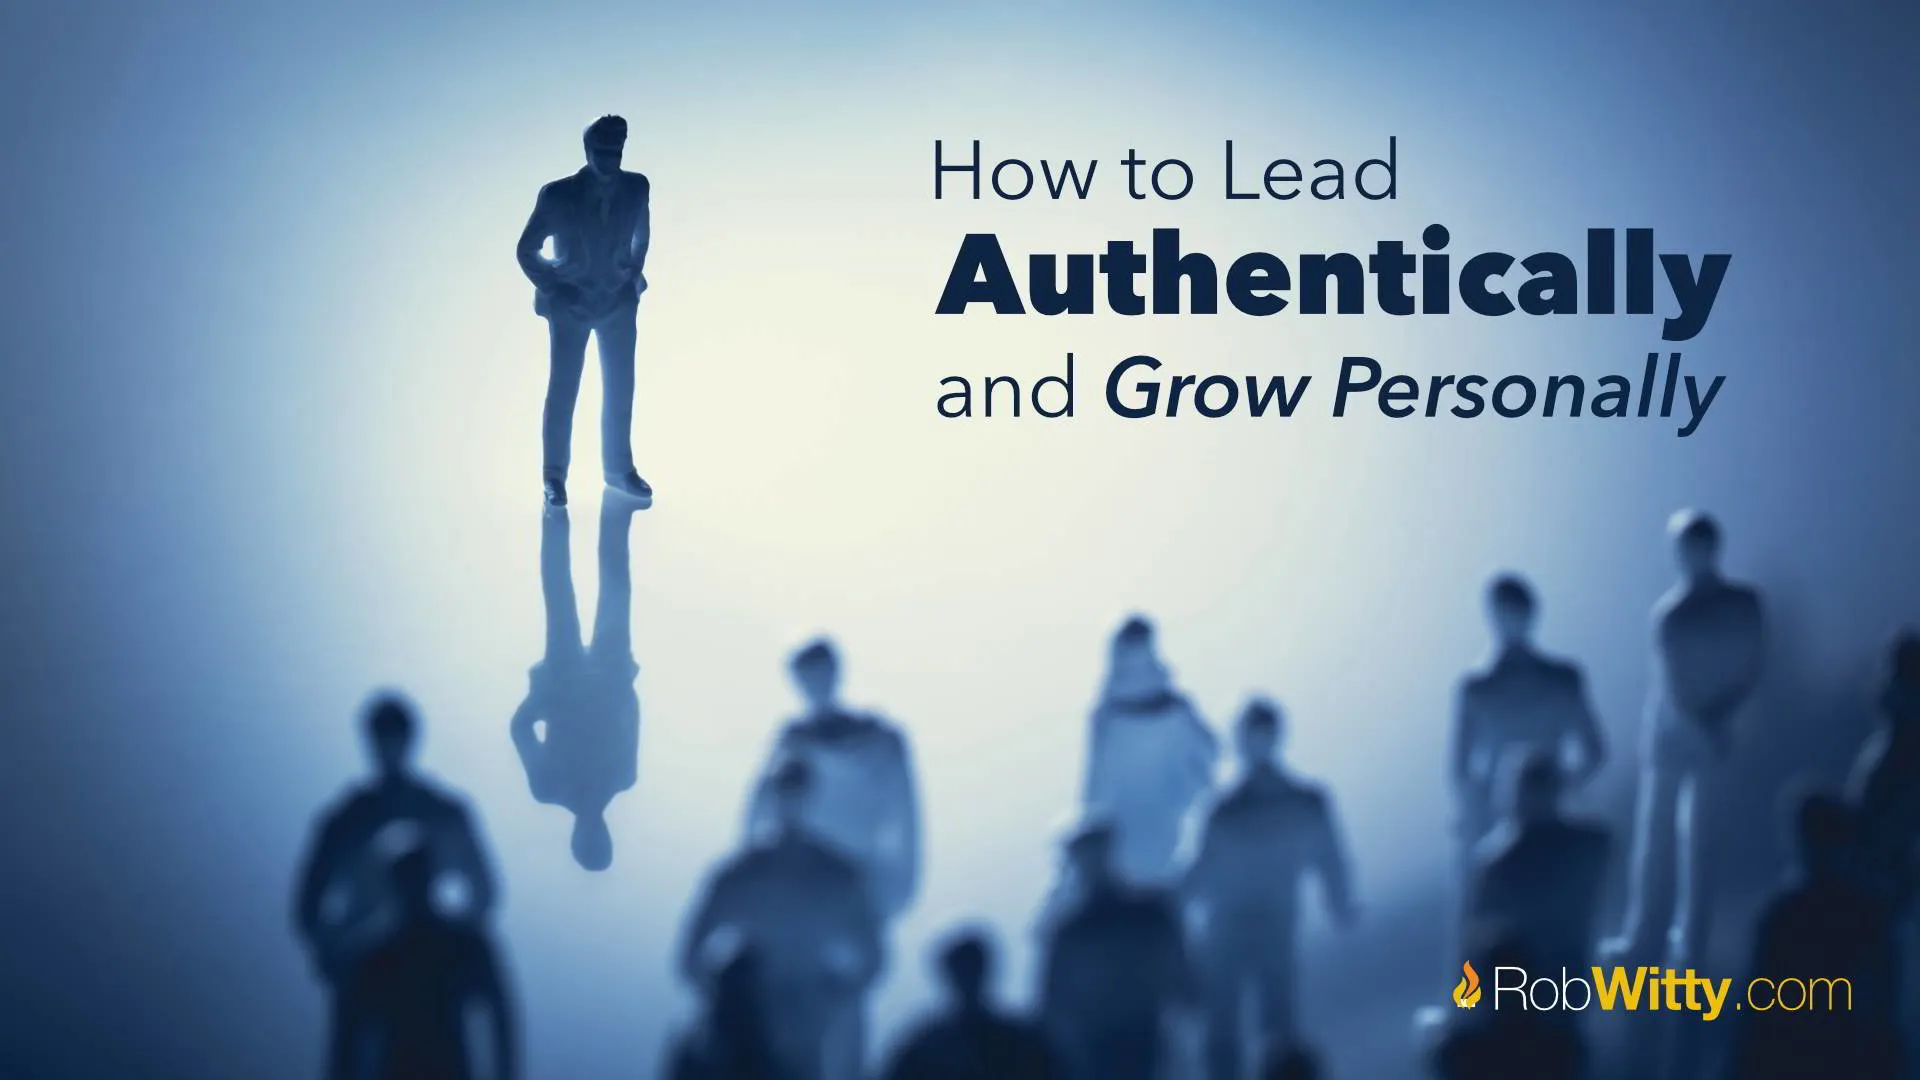 How to Lead Authentically and Grow Personally